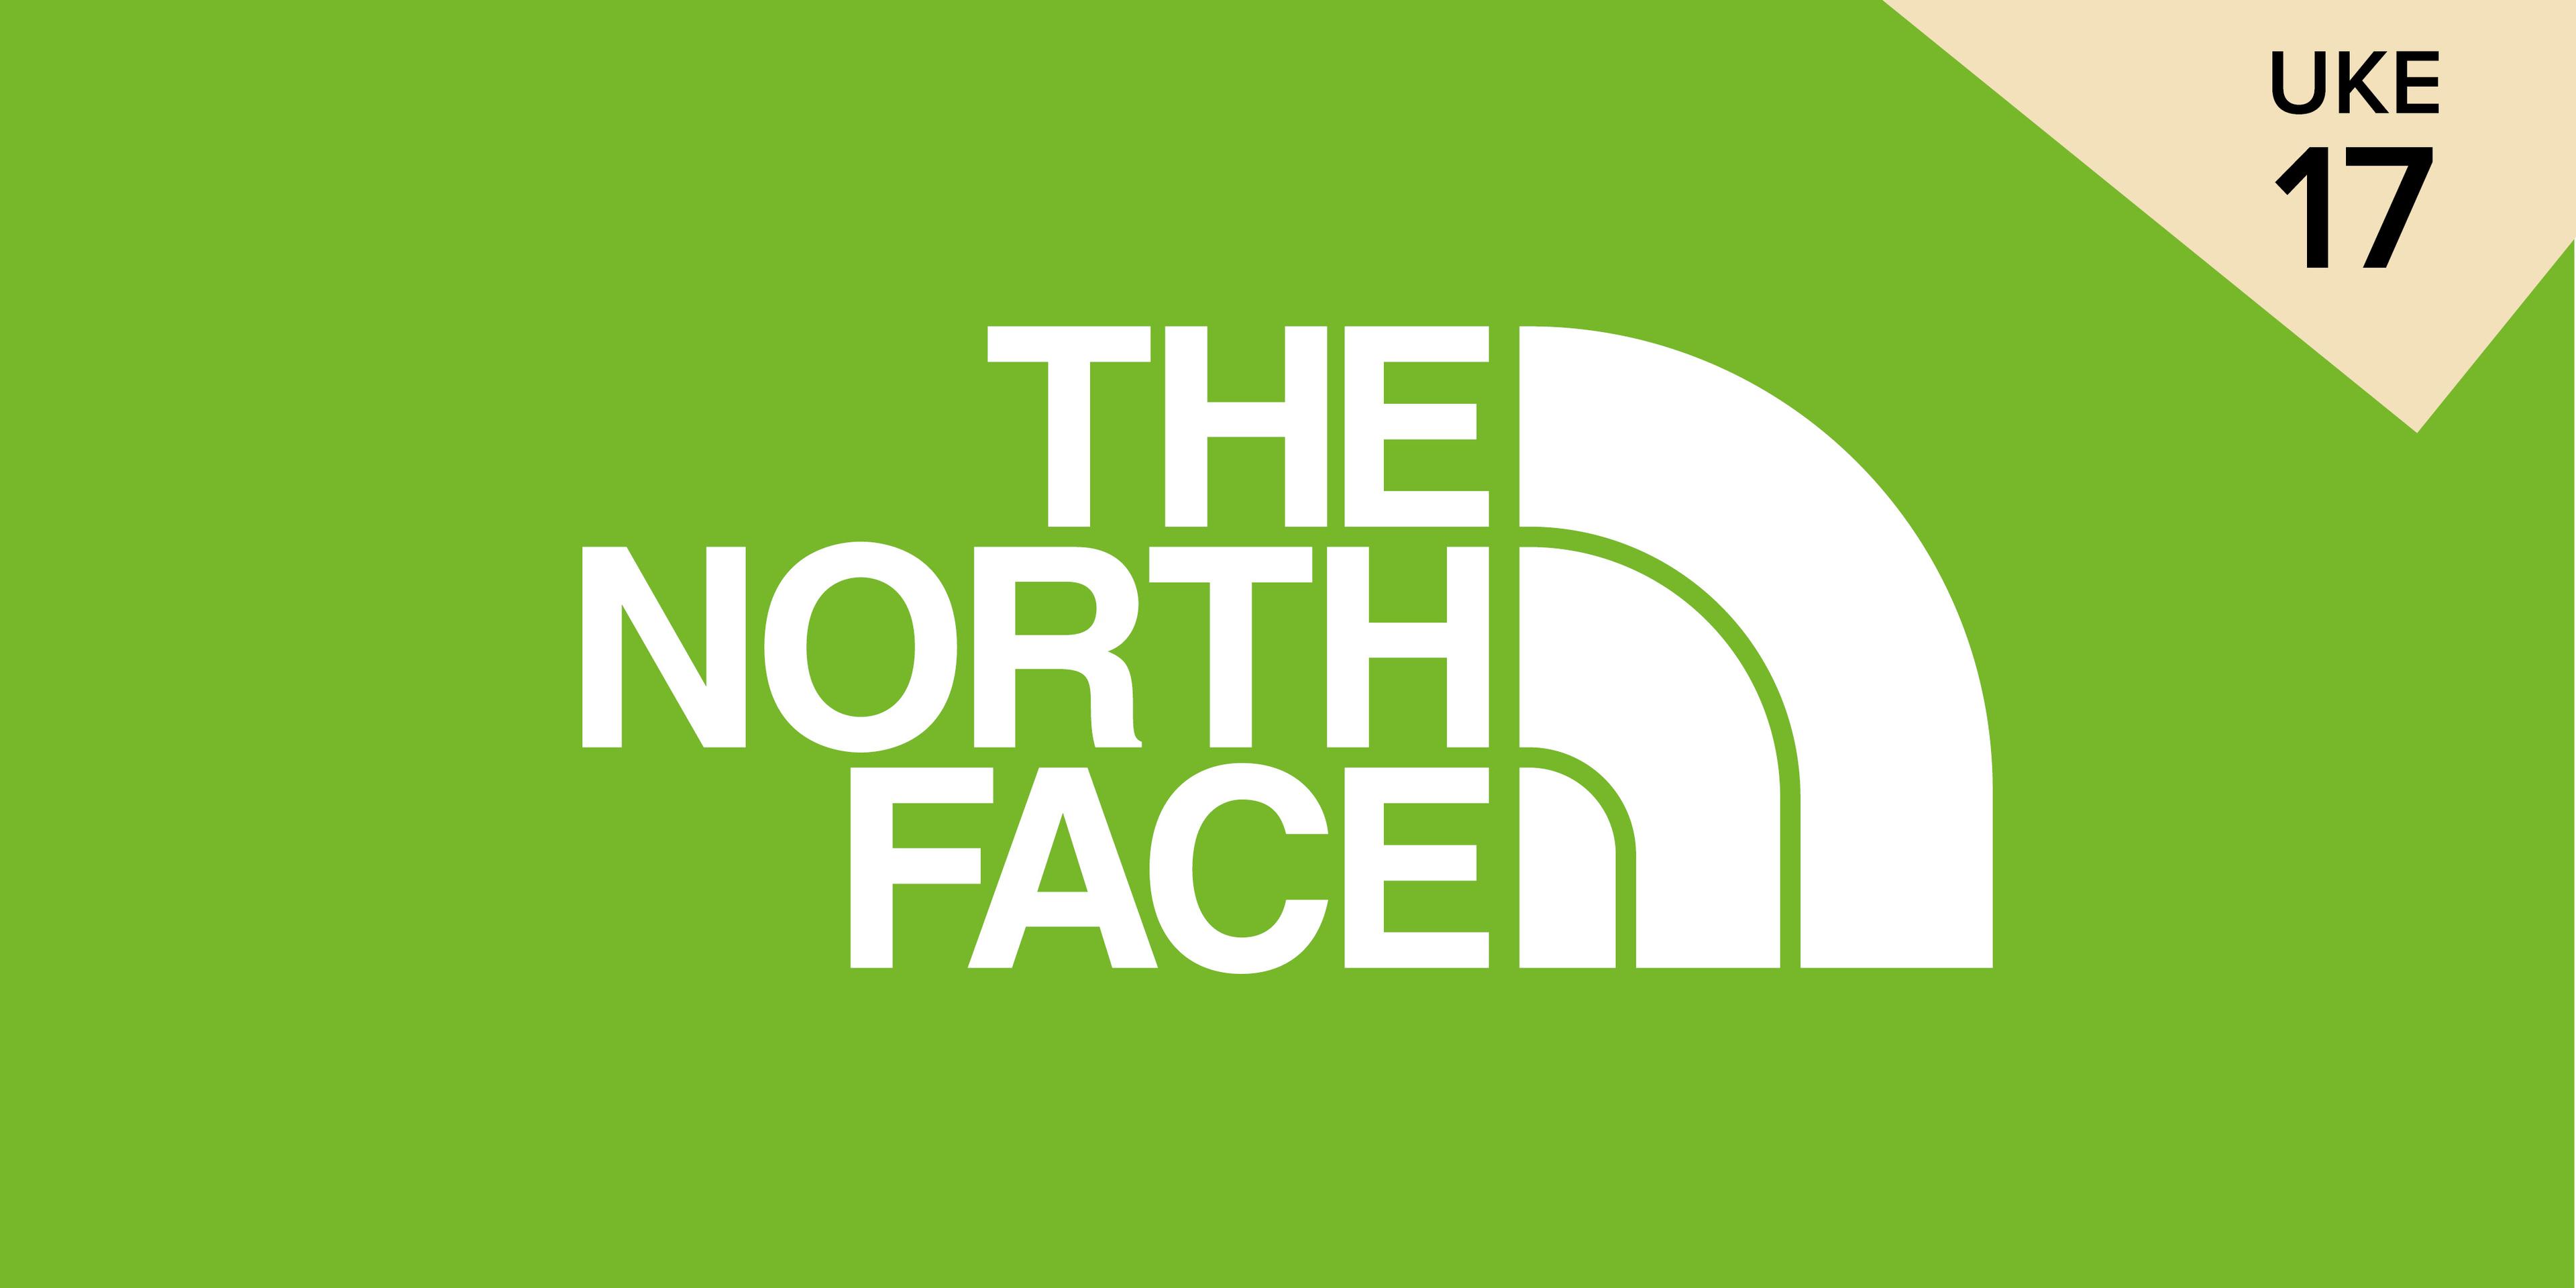 Solorace The North face